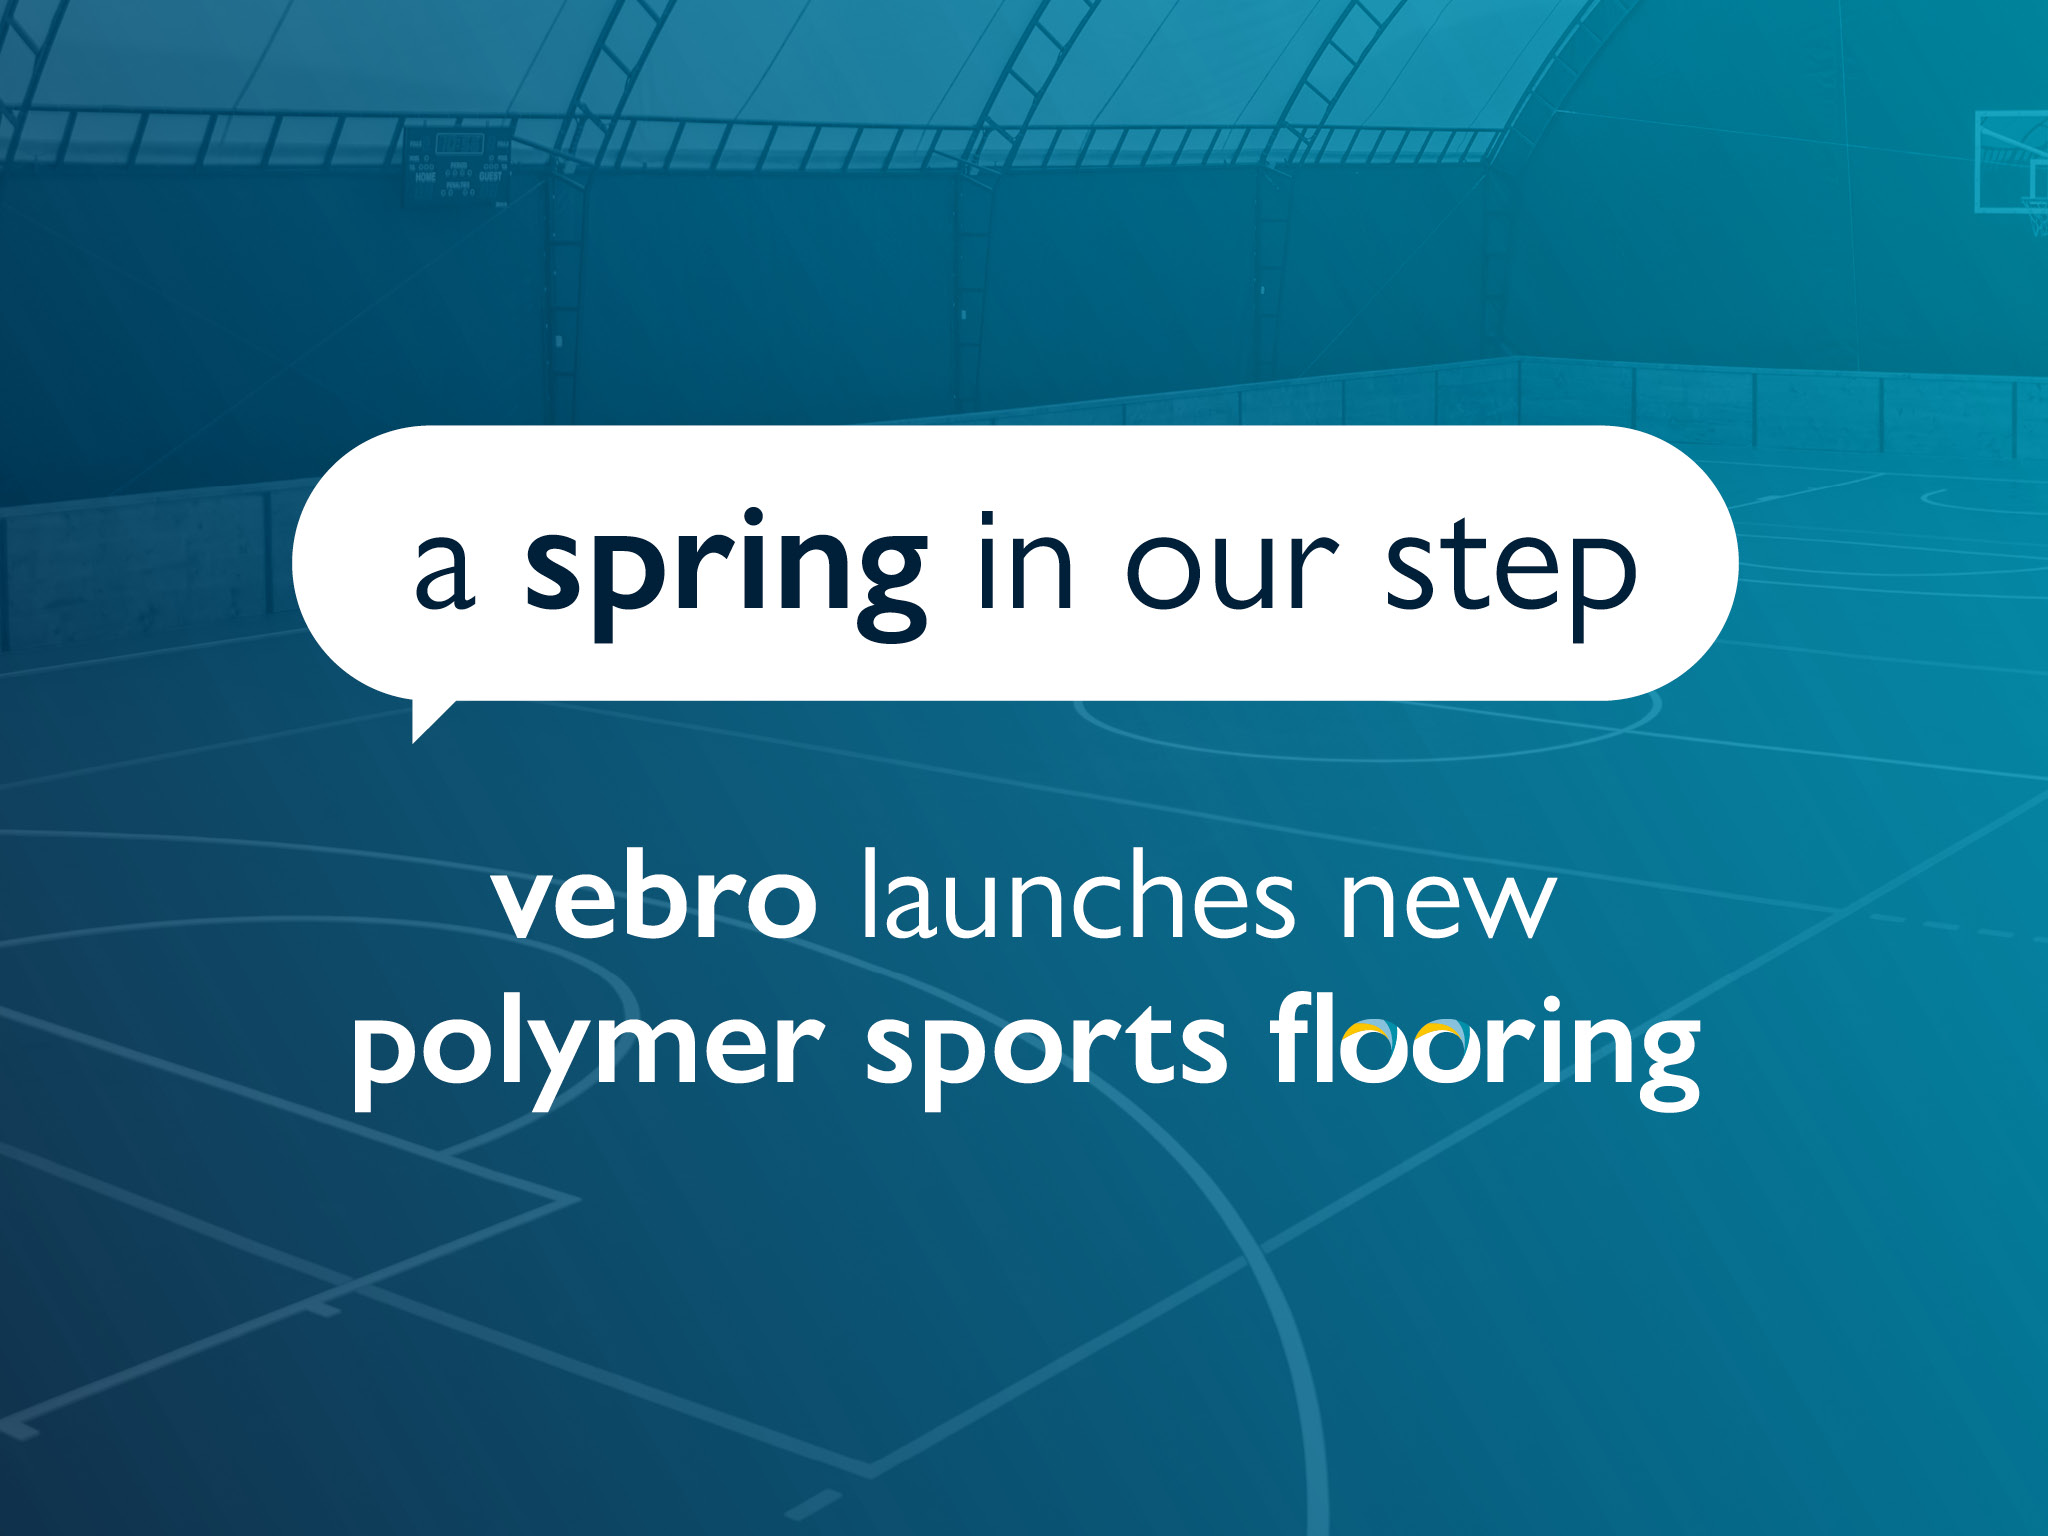 A Spring in Vebro’s Sporting Step: New polymer sports flooring systems launched